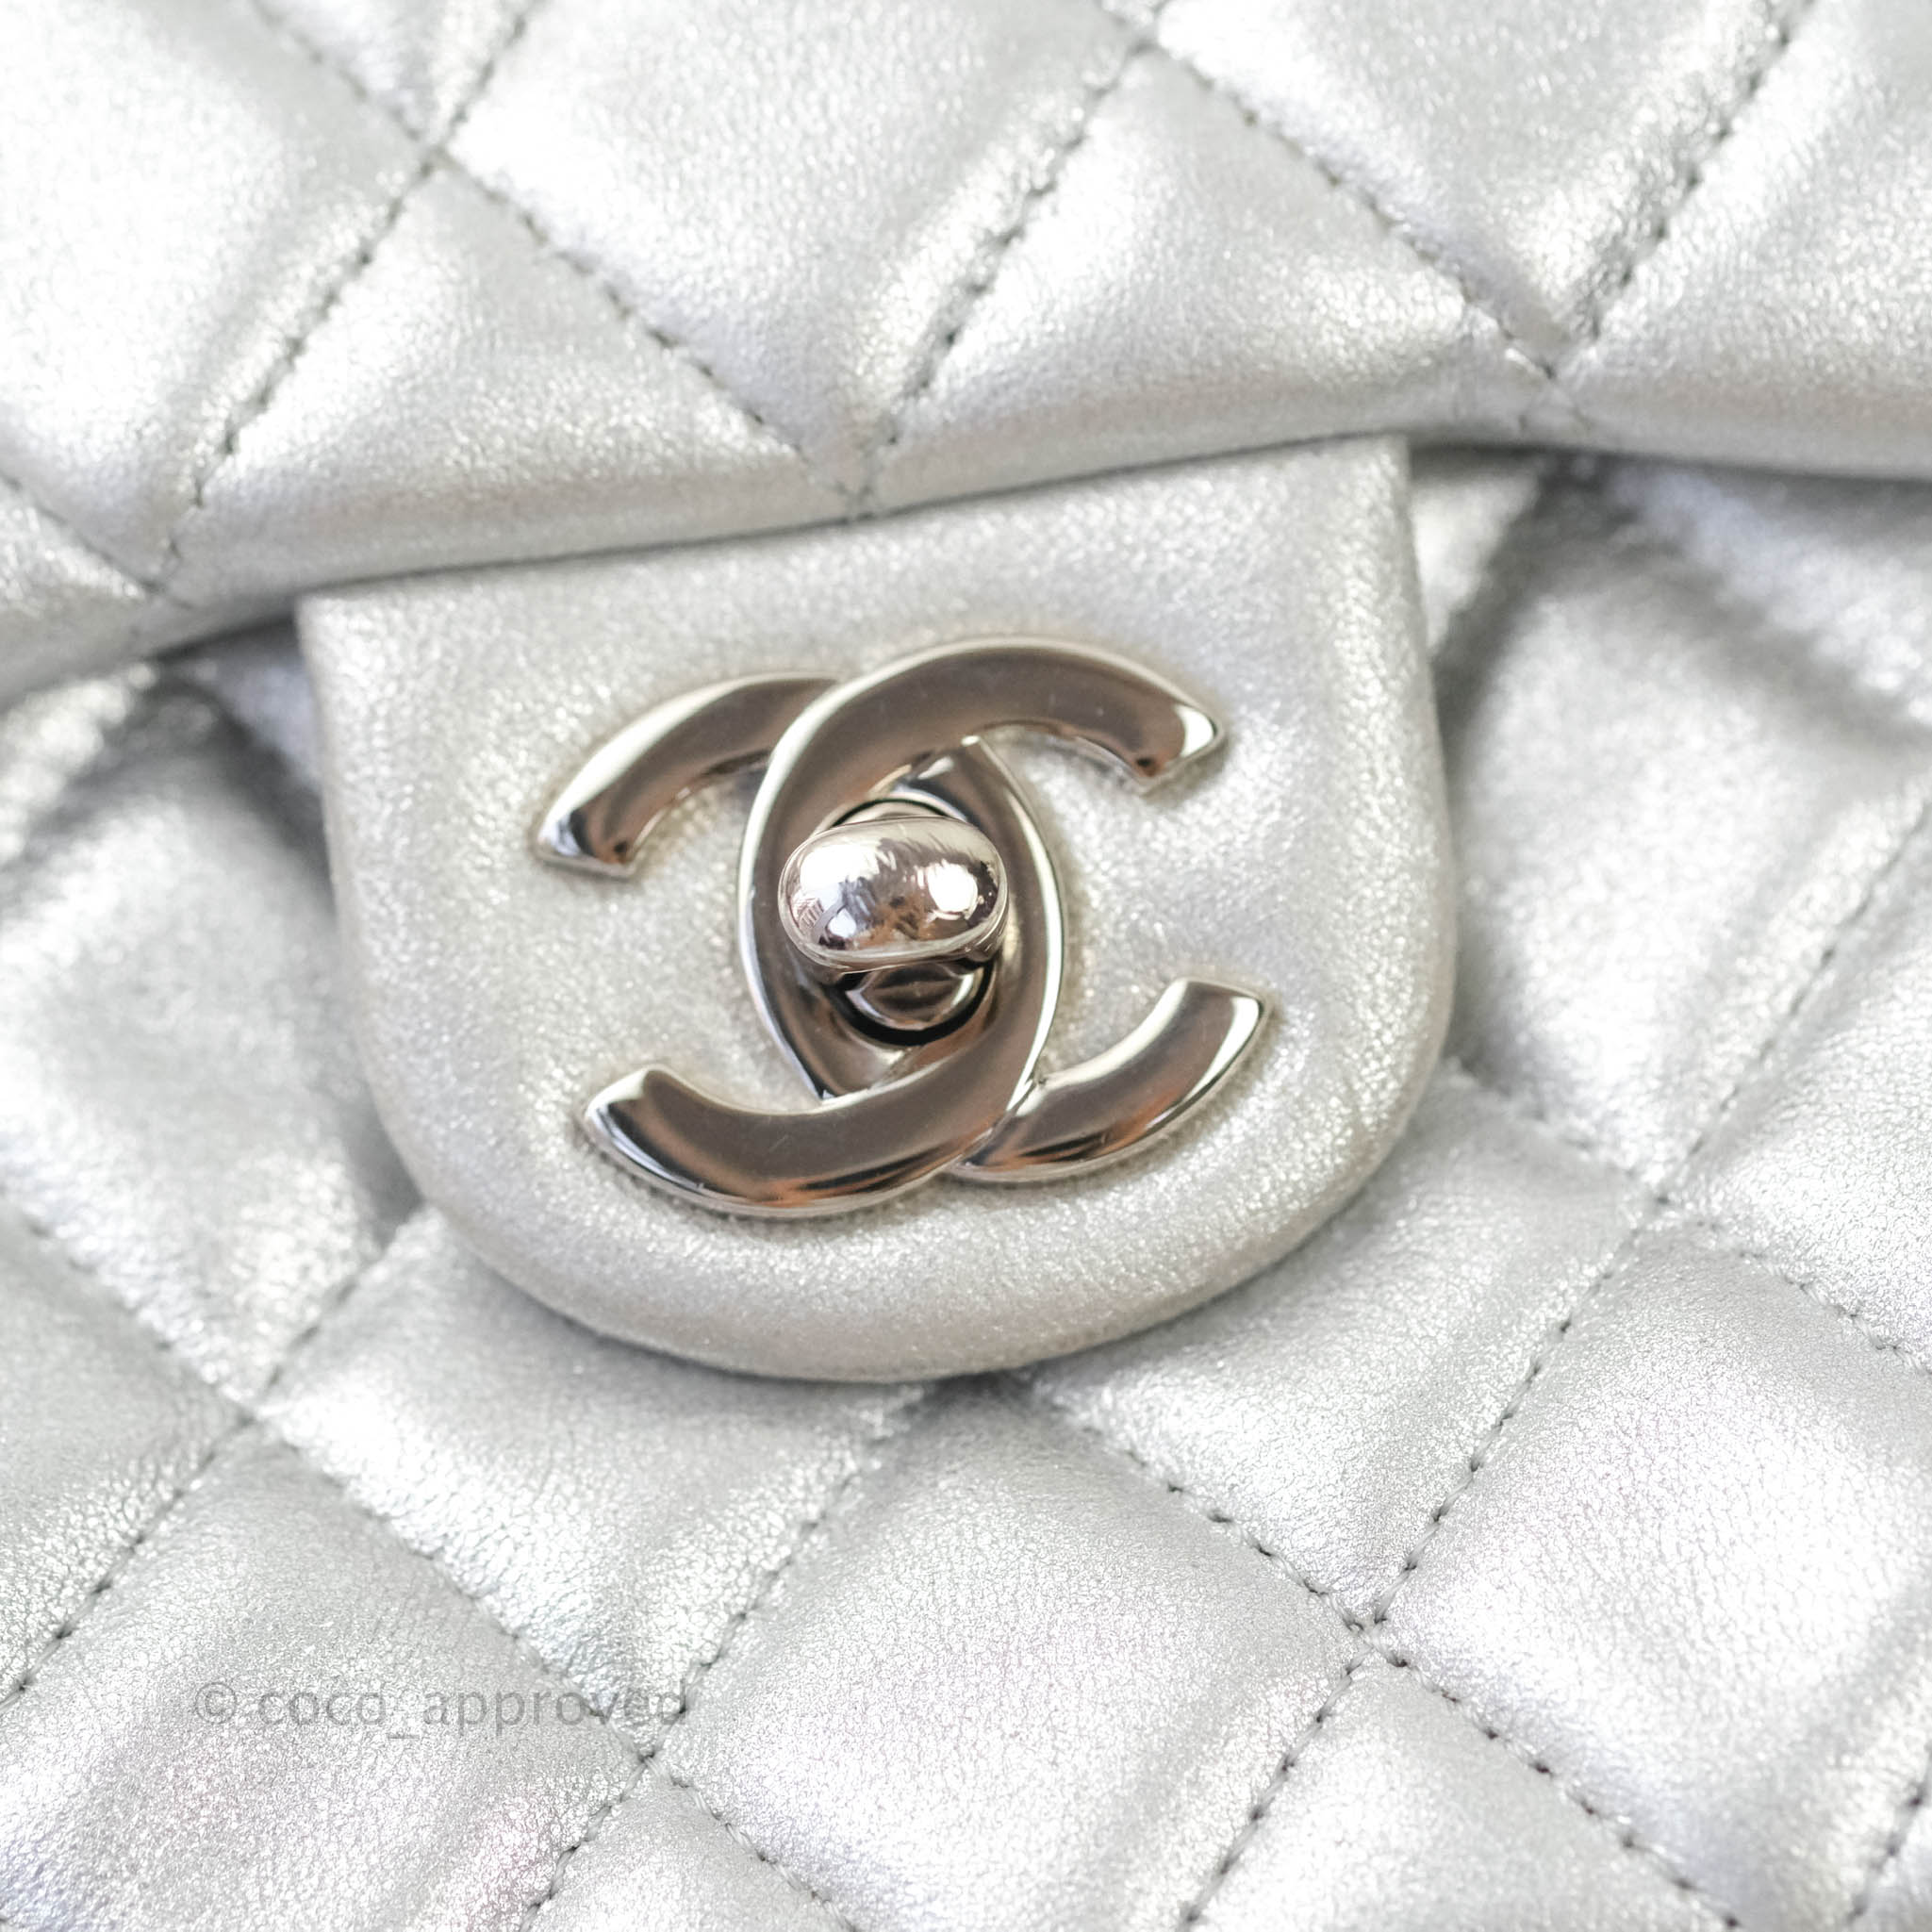 clear chanel backpack bag